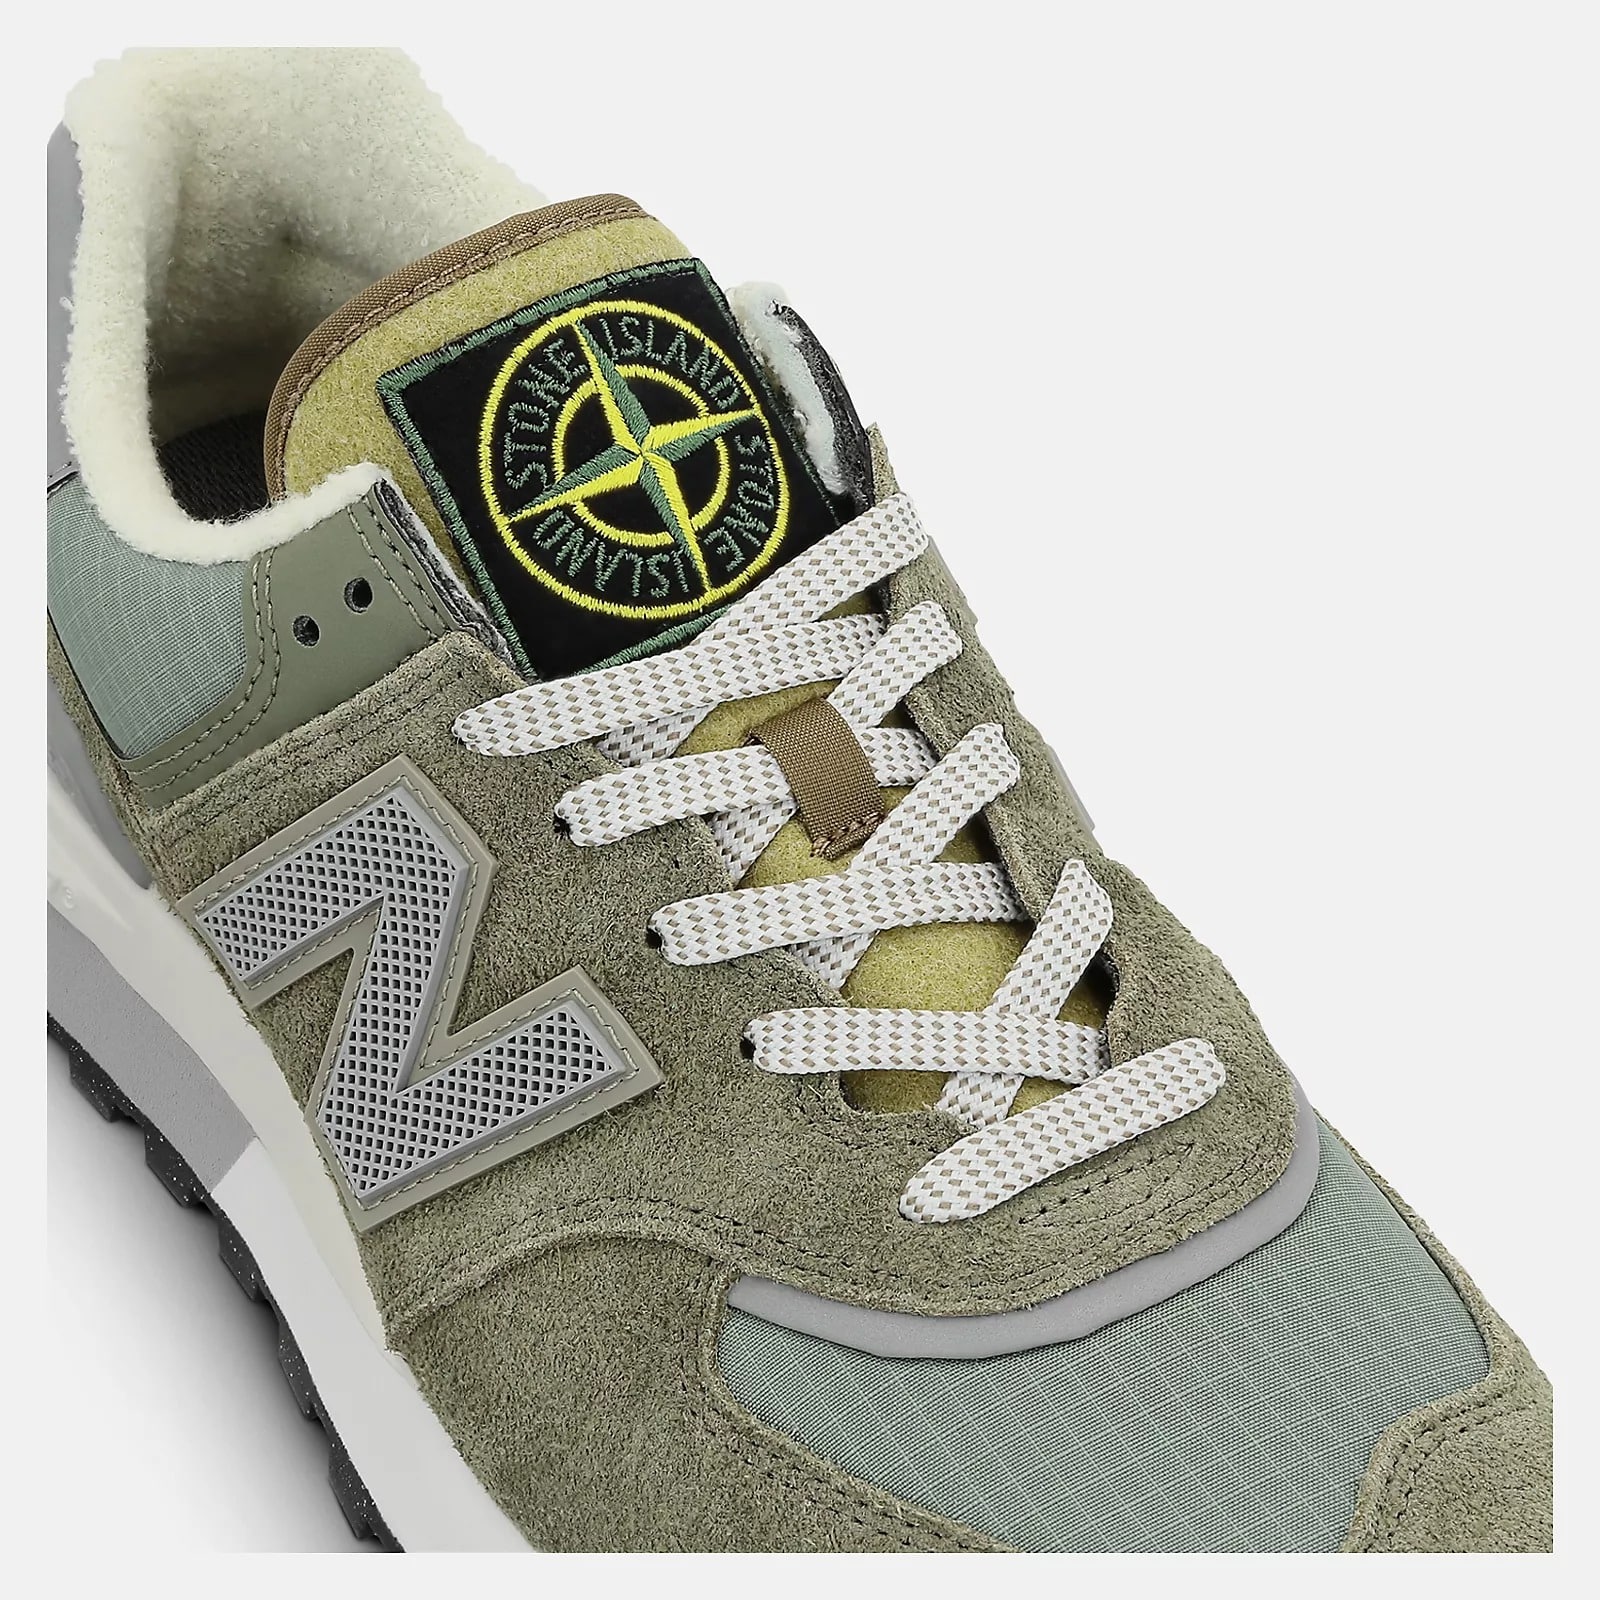 This Is What the Stone Island x New Balance 574 Looks Like | Grailify